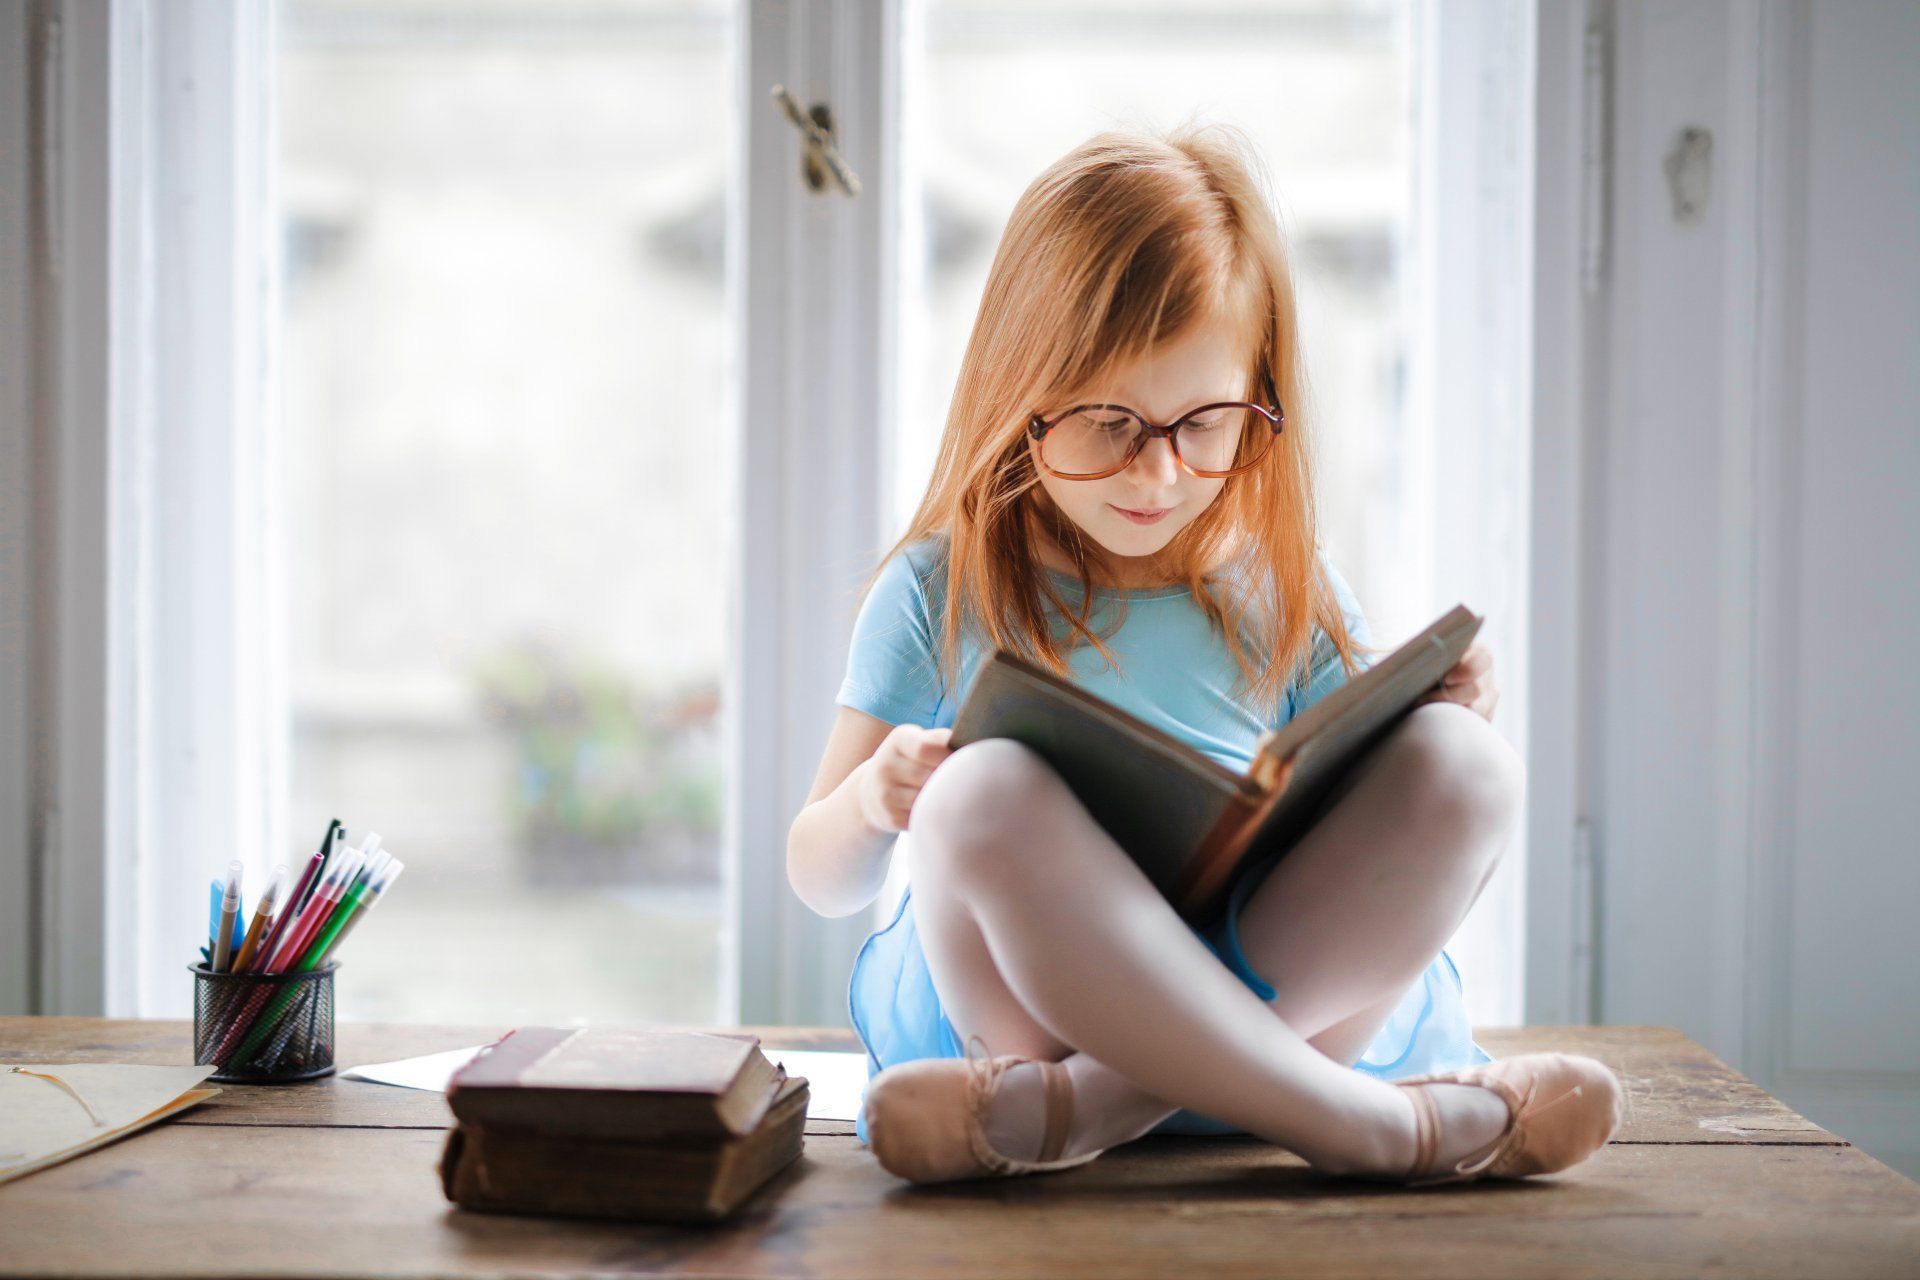 image of a girl sitting on the floor reading a book